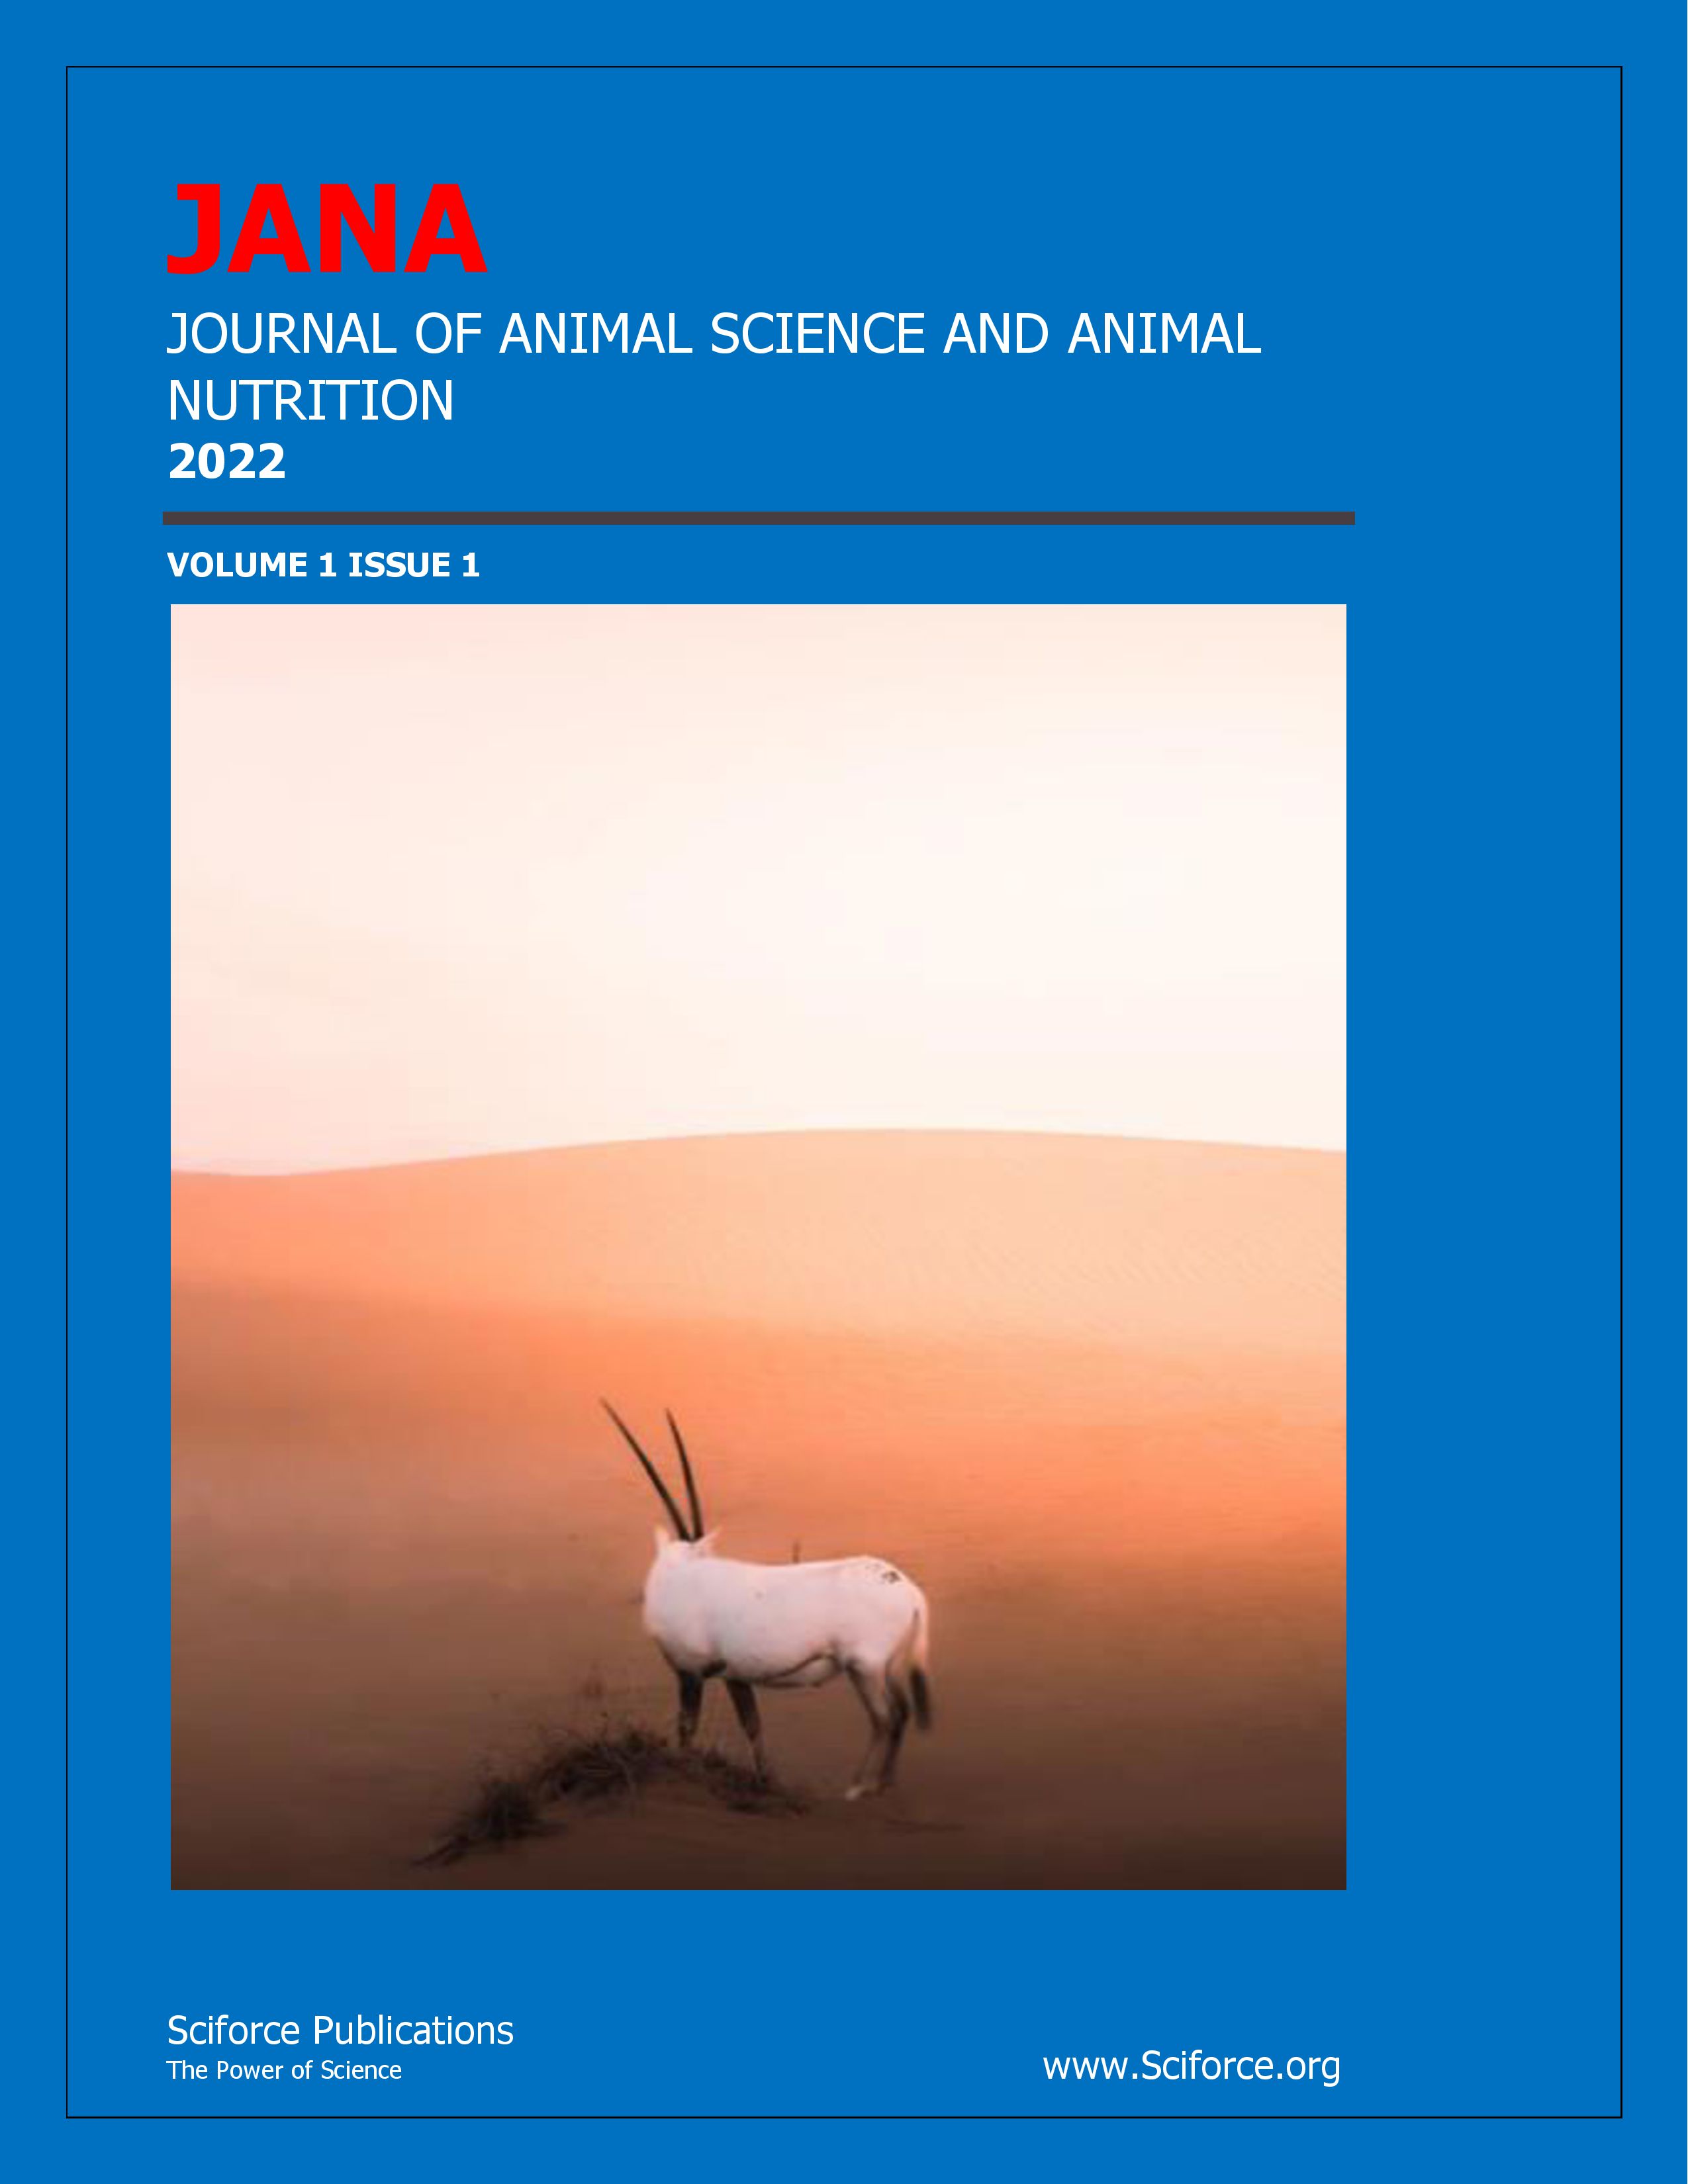 Journal of Animal Science and Animal Nutrition